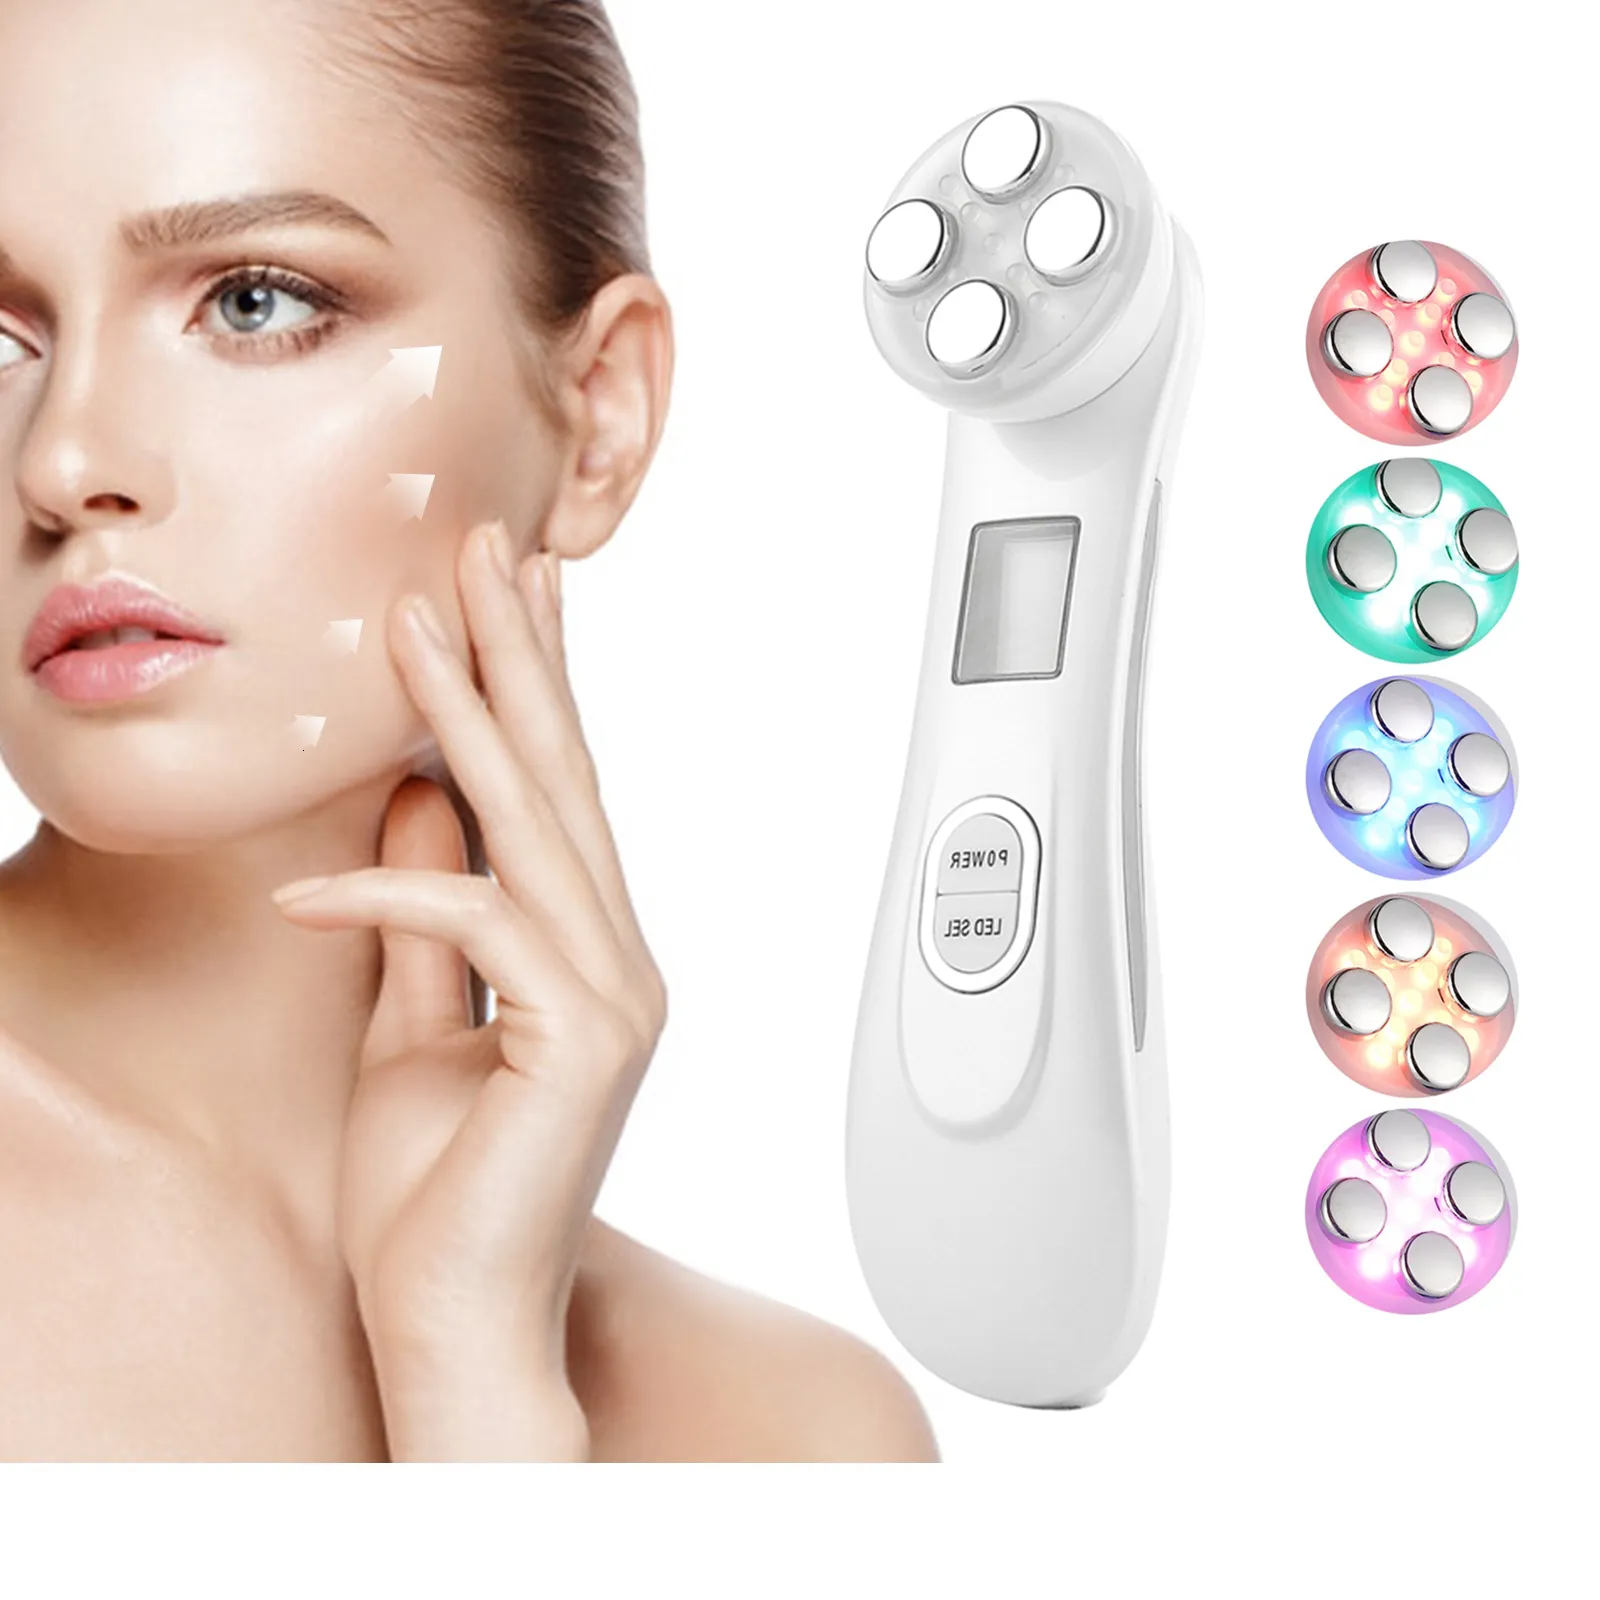 Face Massager 5IN1 RF Radio Frequency EMS Electroporation LED Pon Beauty Device Skin Lifting Tighten AntiWrinkle Skin Care Face Massager 230411